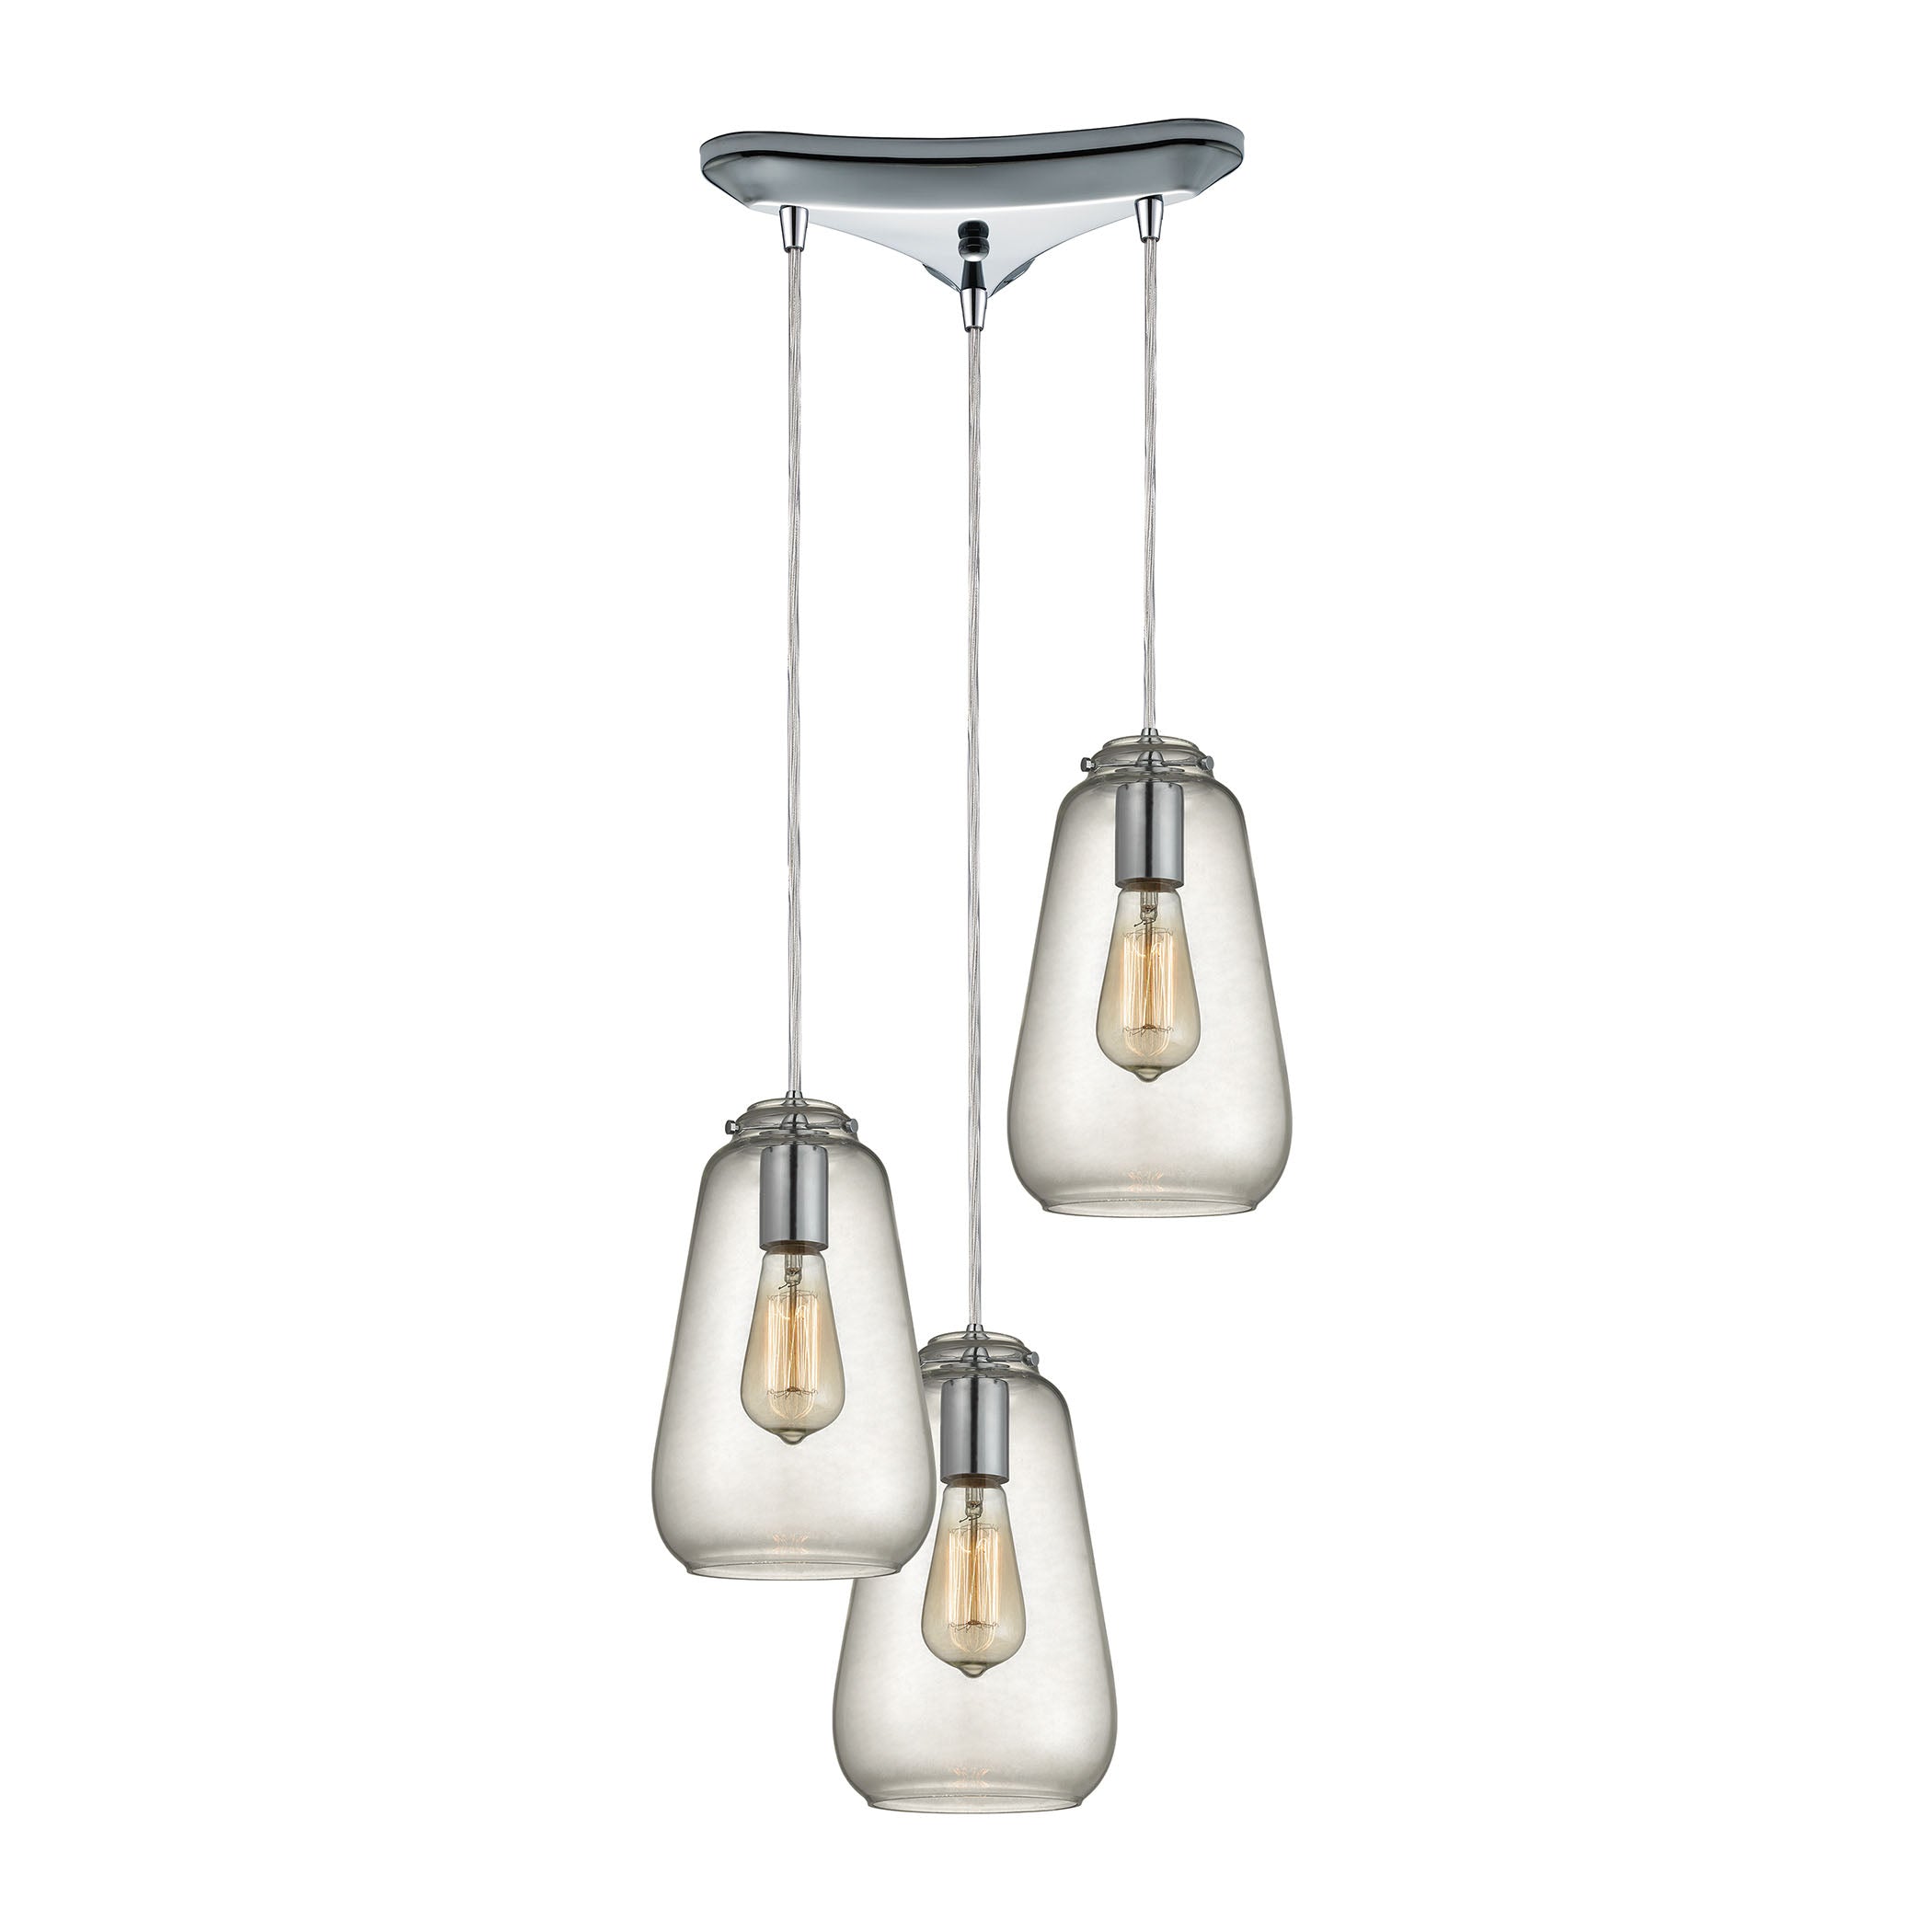 ELK Lighting 10423/3 Orbital 3-Light Triangular Pendant Fixture in Polished Chrome with Clear Glass